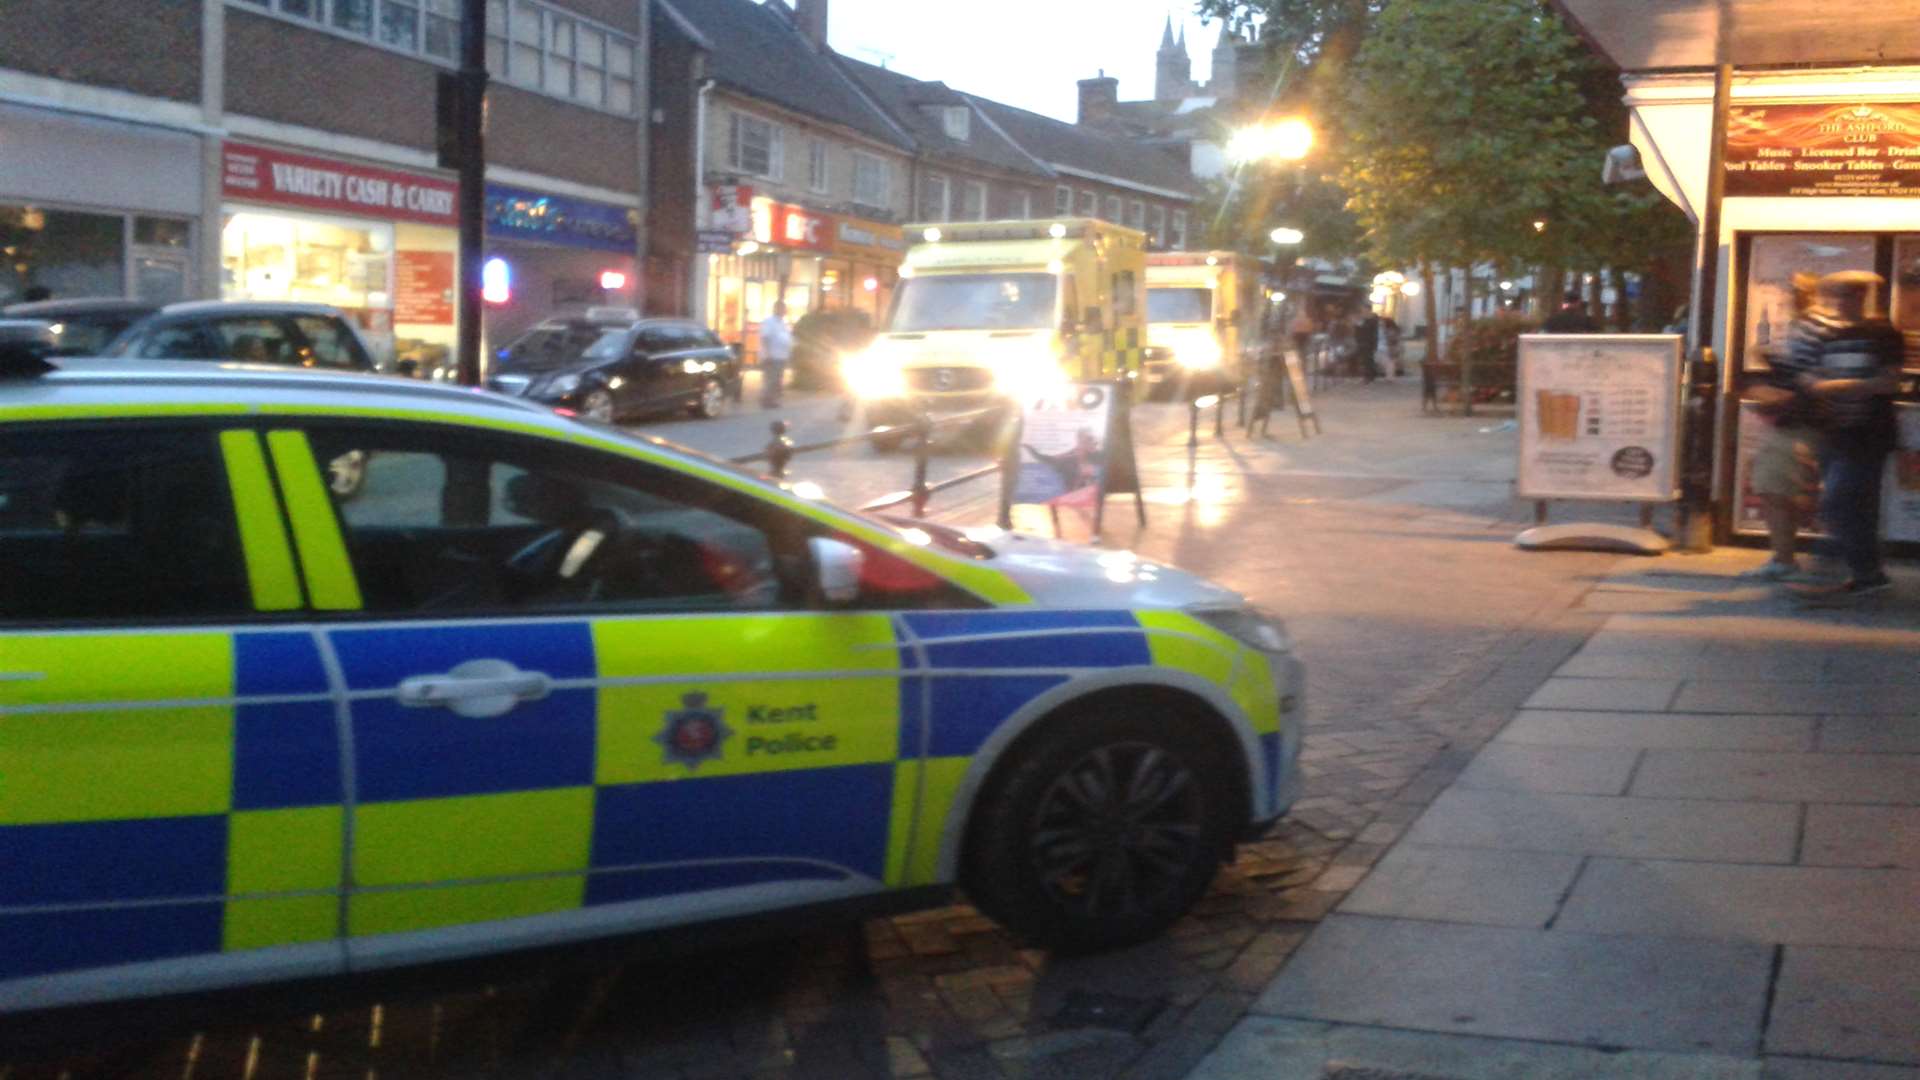 Police and two ambulances were called to the lower High Street